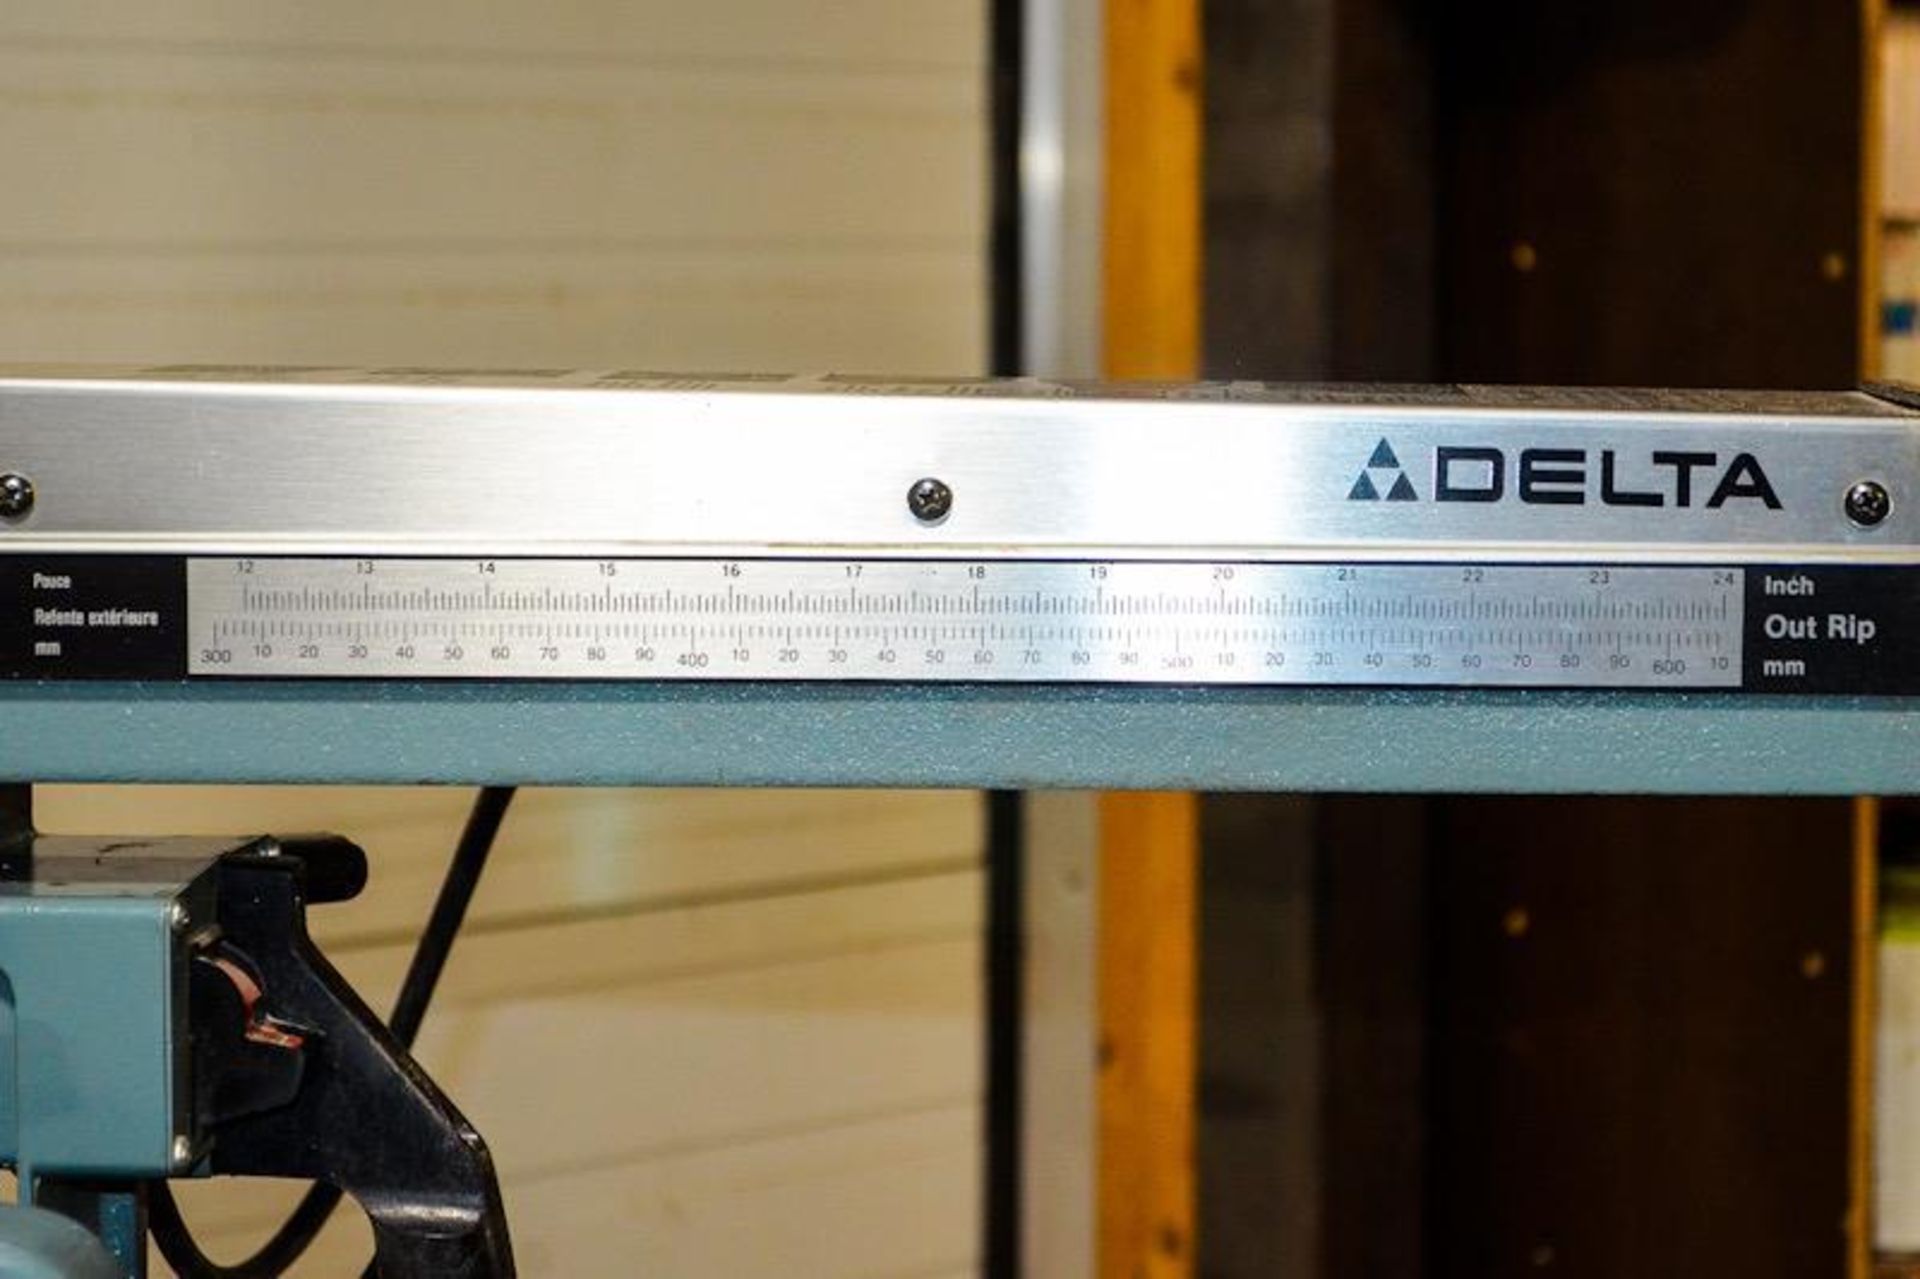 DELTA 10 10” RADIAL ARM SAW, BLADE SIZE 20” X 30” X 4.75”H, RIP CAP. 0-14” IN / 12” – 24” OUT, BLADE - Image 4 of 8